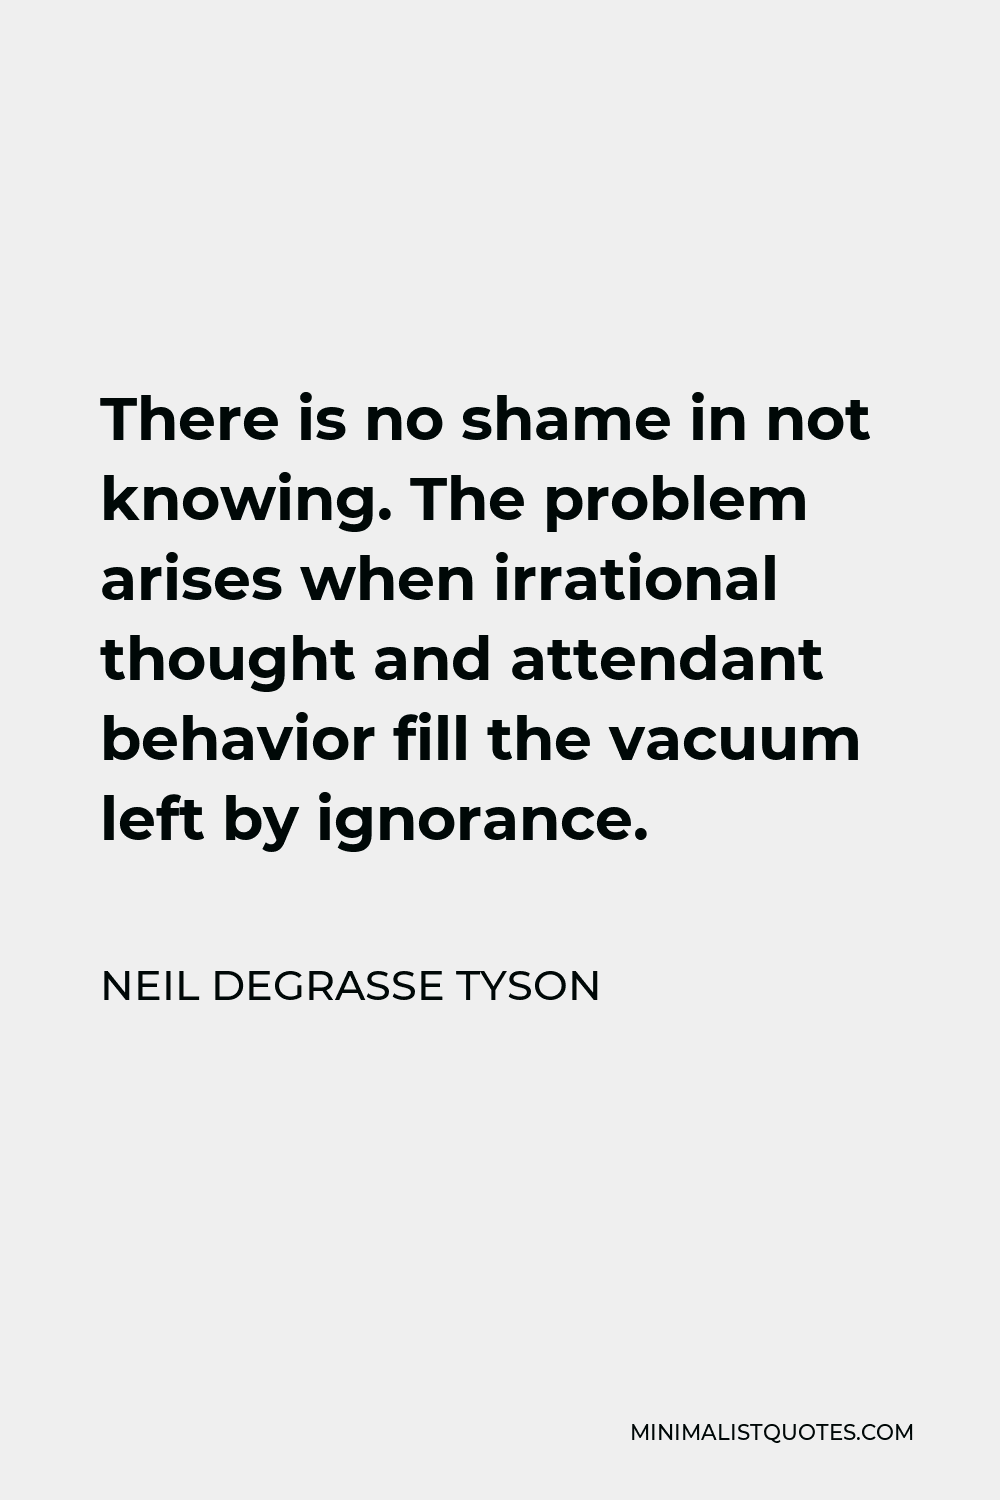 Neil deGrasse Tyson Quote - There is no shame in not knowing. The problem arises when irrational thought and attendant behavior fill the vacuum left by ignorance.